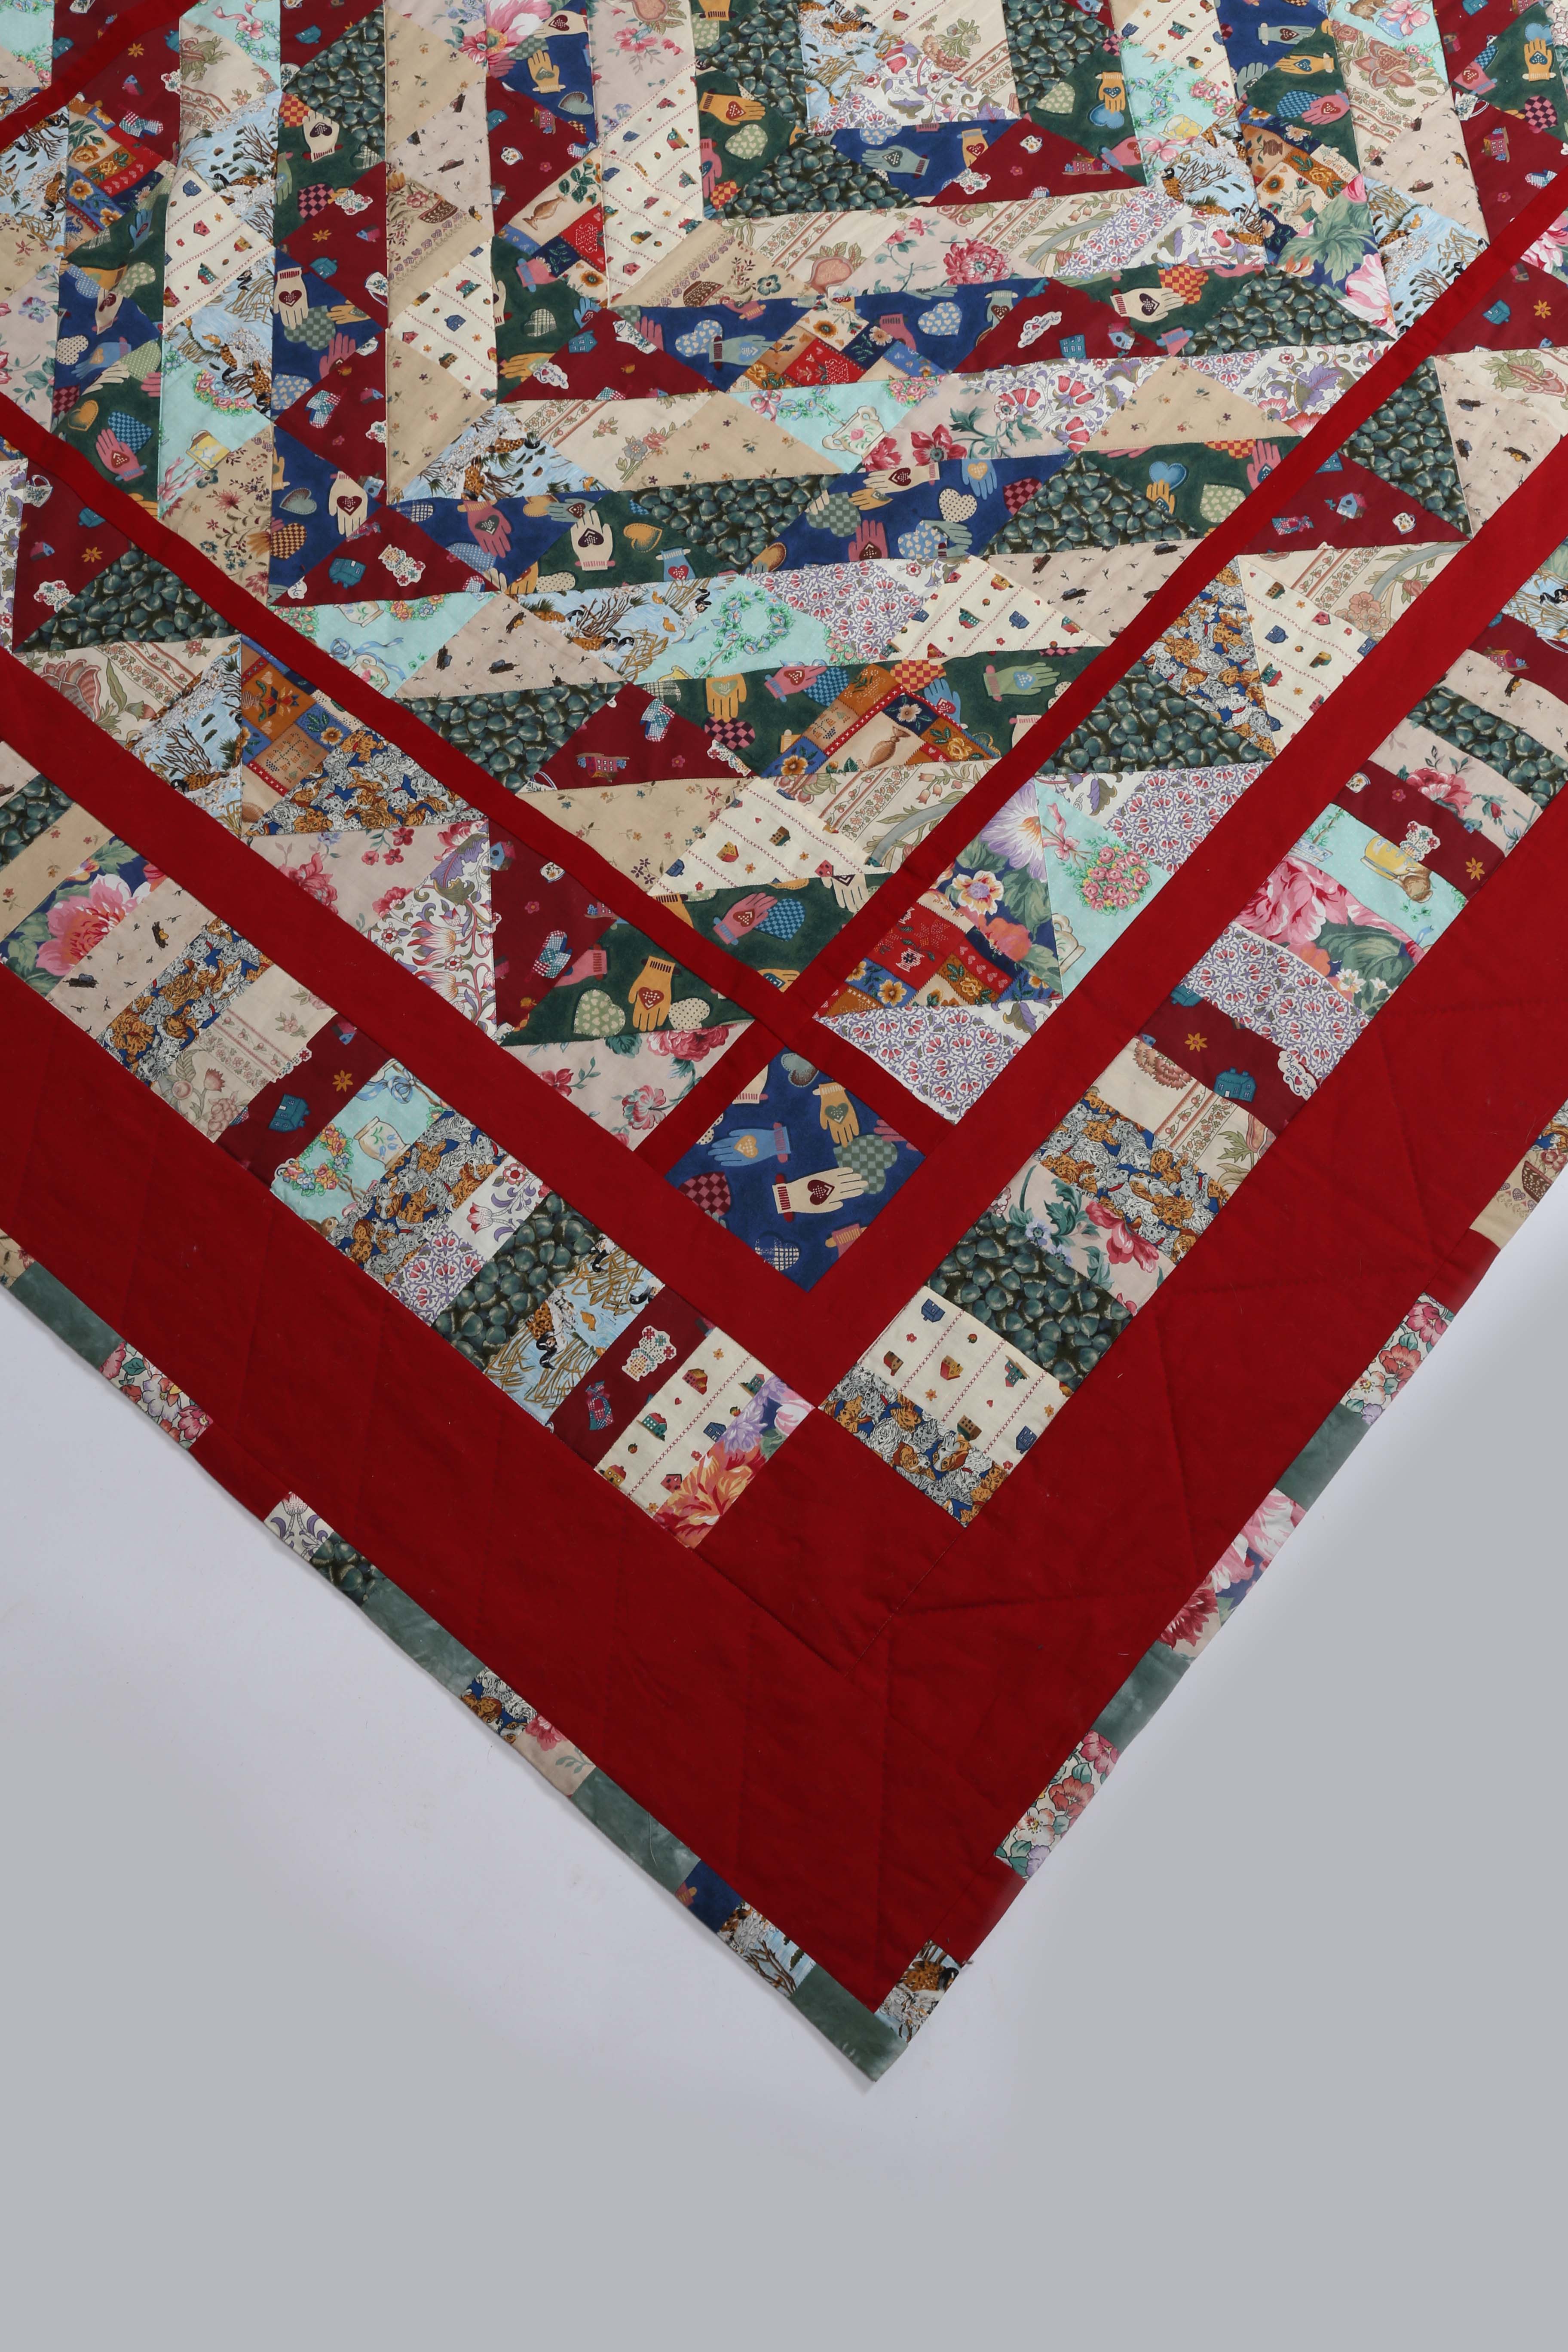 A BEAUTIFUL PATCH WORK SINGLE QUILT - Image 2 of 3